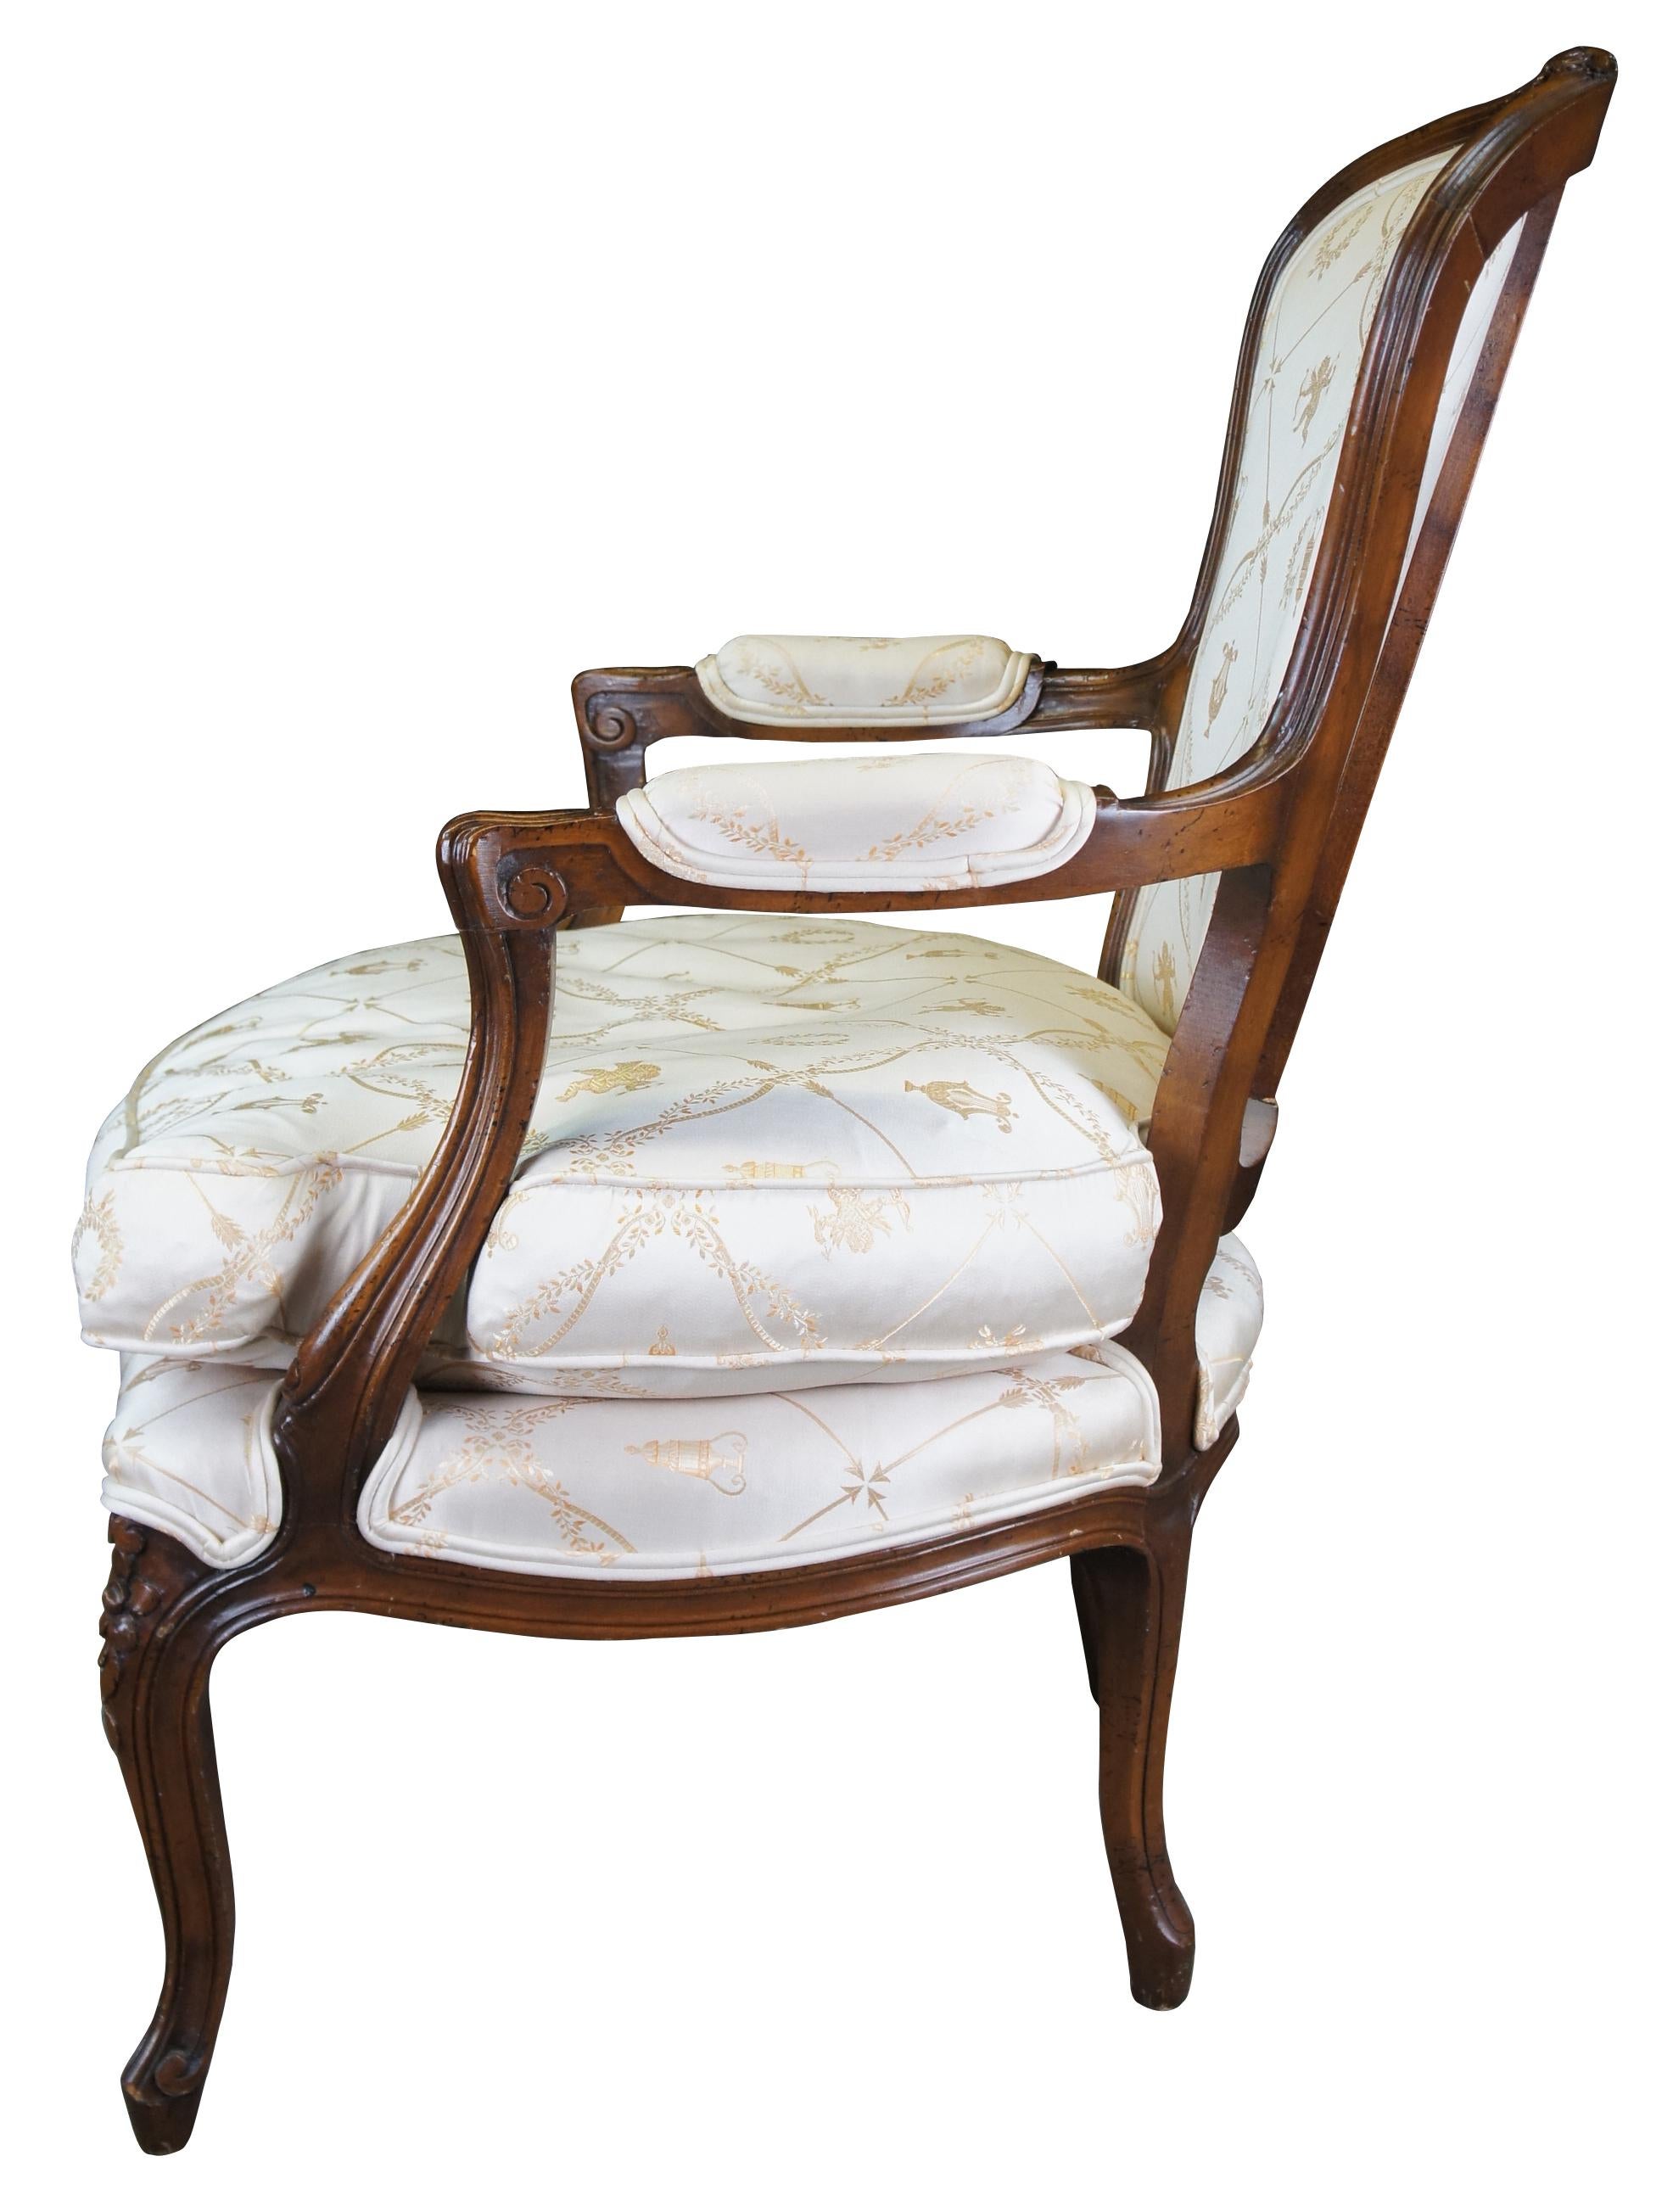 W & J Sloane Mid Century French Walnut Louis XV Fauteuil Arm Chair Downfill Seat In Good Condition For Sale In Dayton, OH